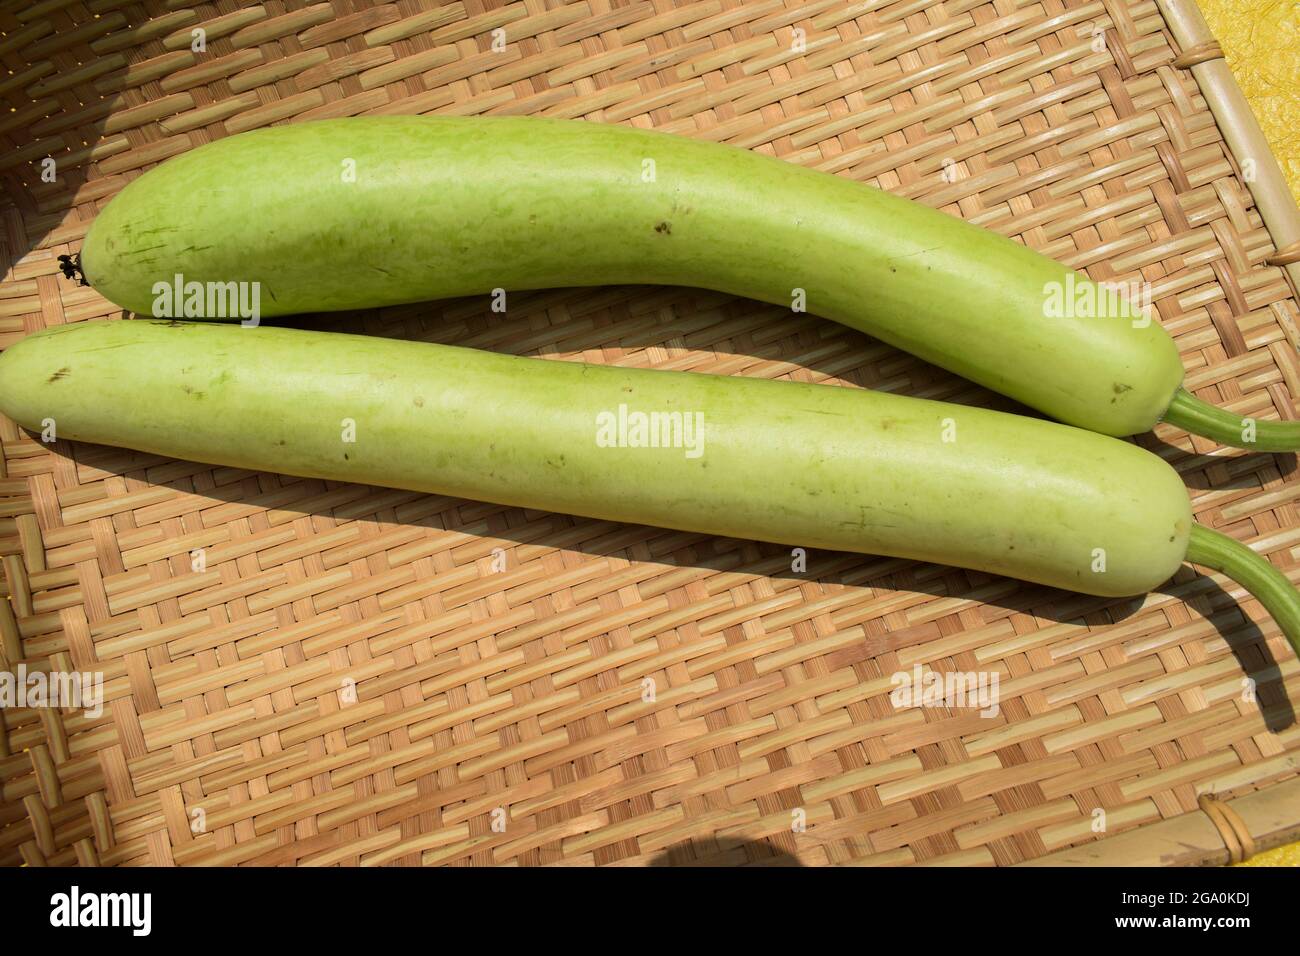 Bottlegourds or white-flower gourd also known as calabash are long and thin melons. indian asian vegetables in bamboo wicker basket background Stock Photo